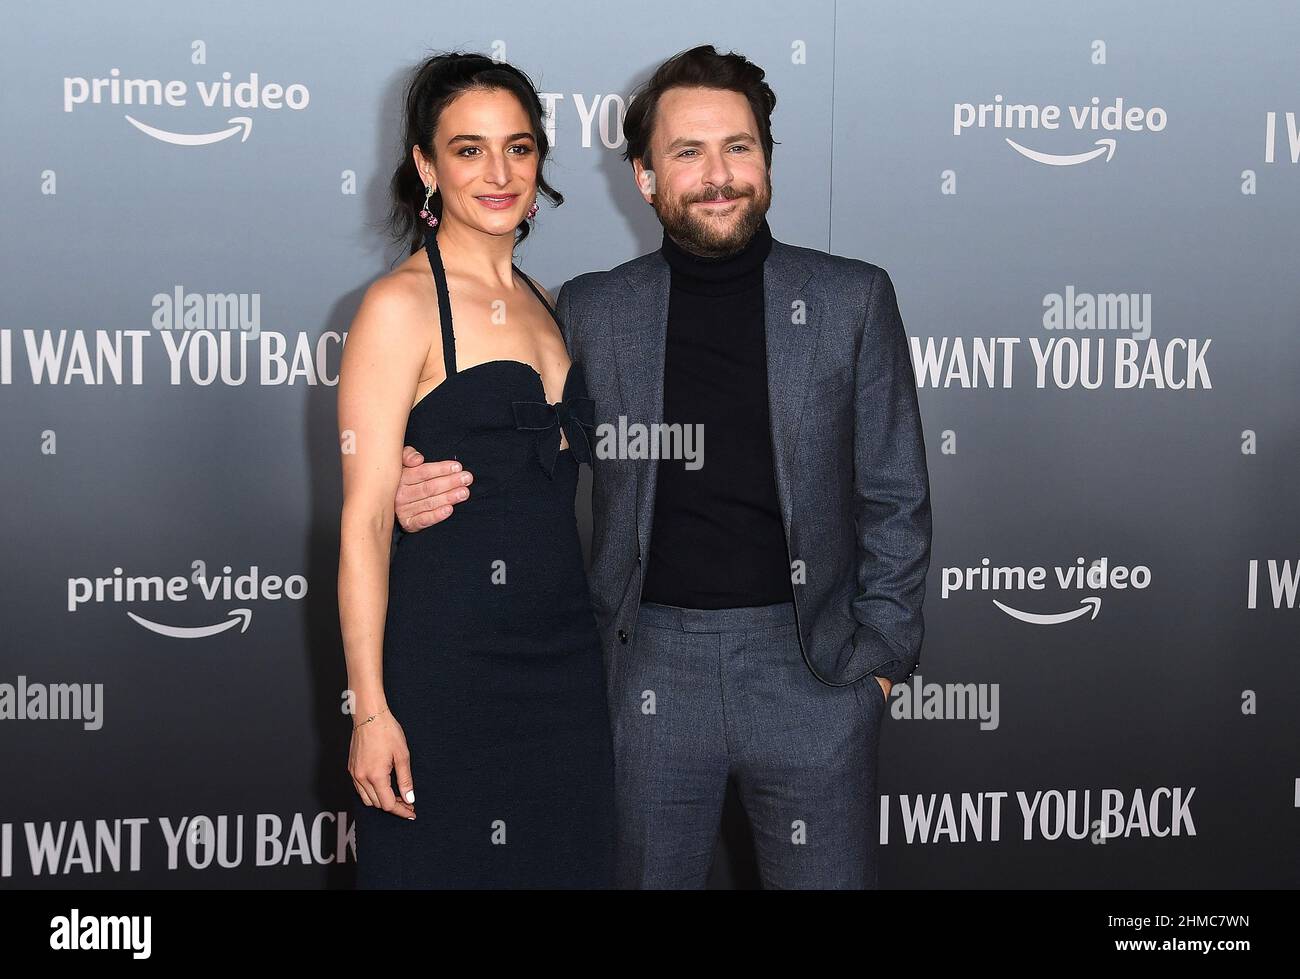 https://c8.alamy.com/comp/2HMC7WN/jenny-slate-and-charlie-day-at-the-amazon-primes-i-want-you-back-los-angeles-premiere-on-february-08-2022-in-los-angeles-ca-usa-photo-by-jc-oliverasipa-usa-2HMC7WN.jpg